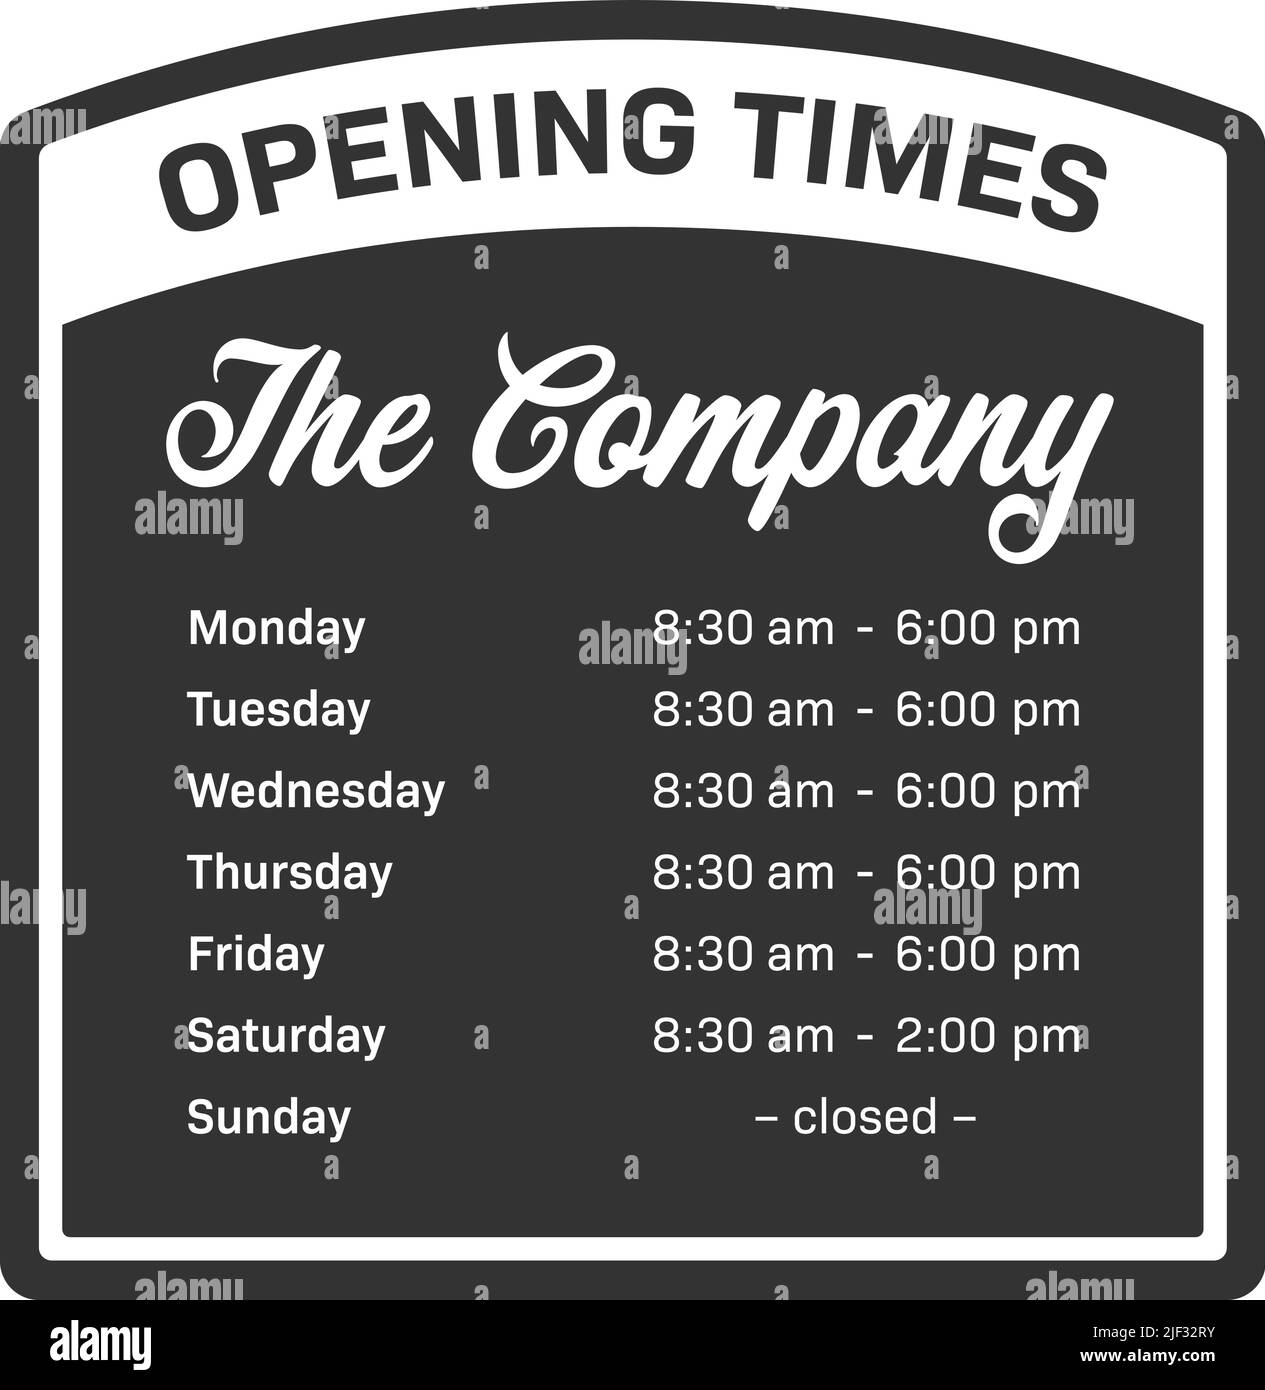 opening times sign template for restaurant, cafe, bar or shop, vector illustration Stock Vector